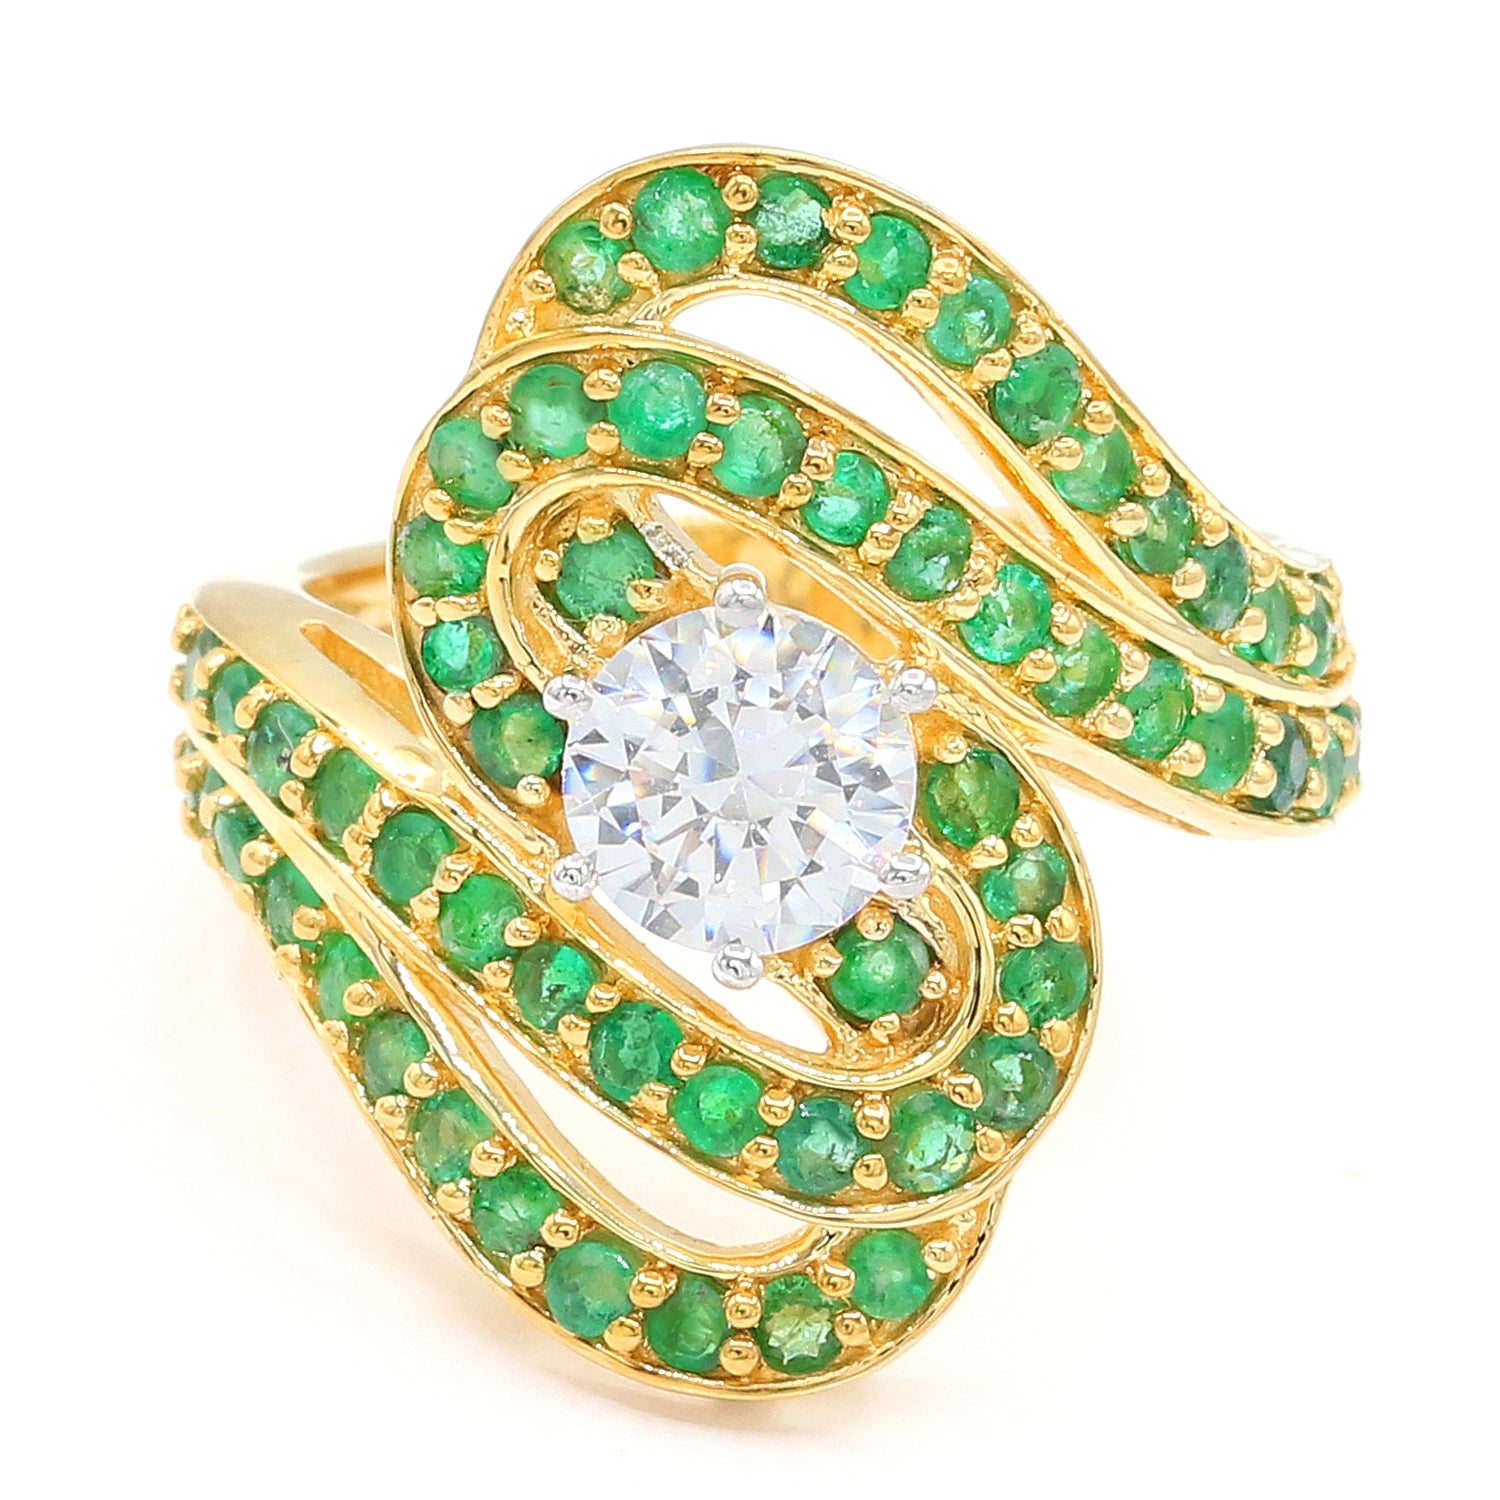 Limited Edition Gems en Vogue Luxe, One-of-a-kind IGI Certified Over 1ct Lab Grown Diamond & Emerald Swirl Ring